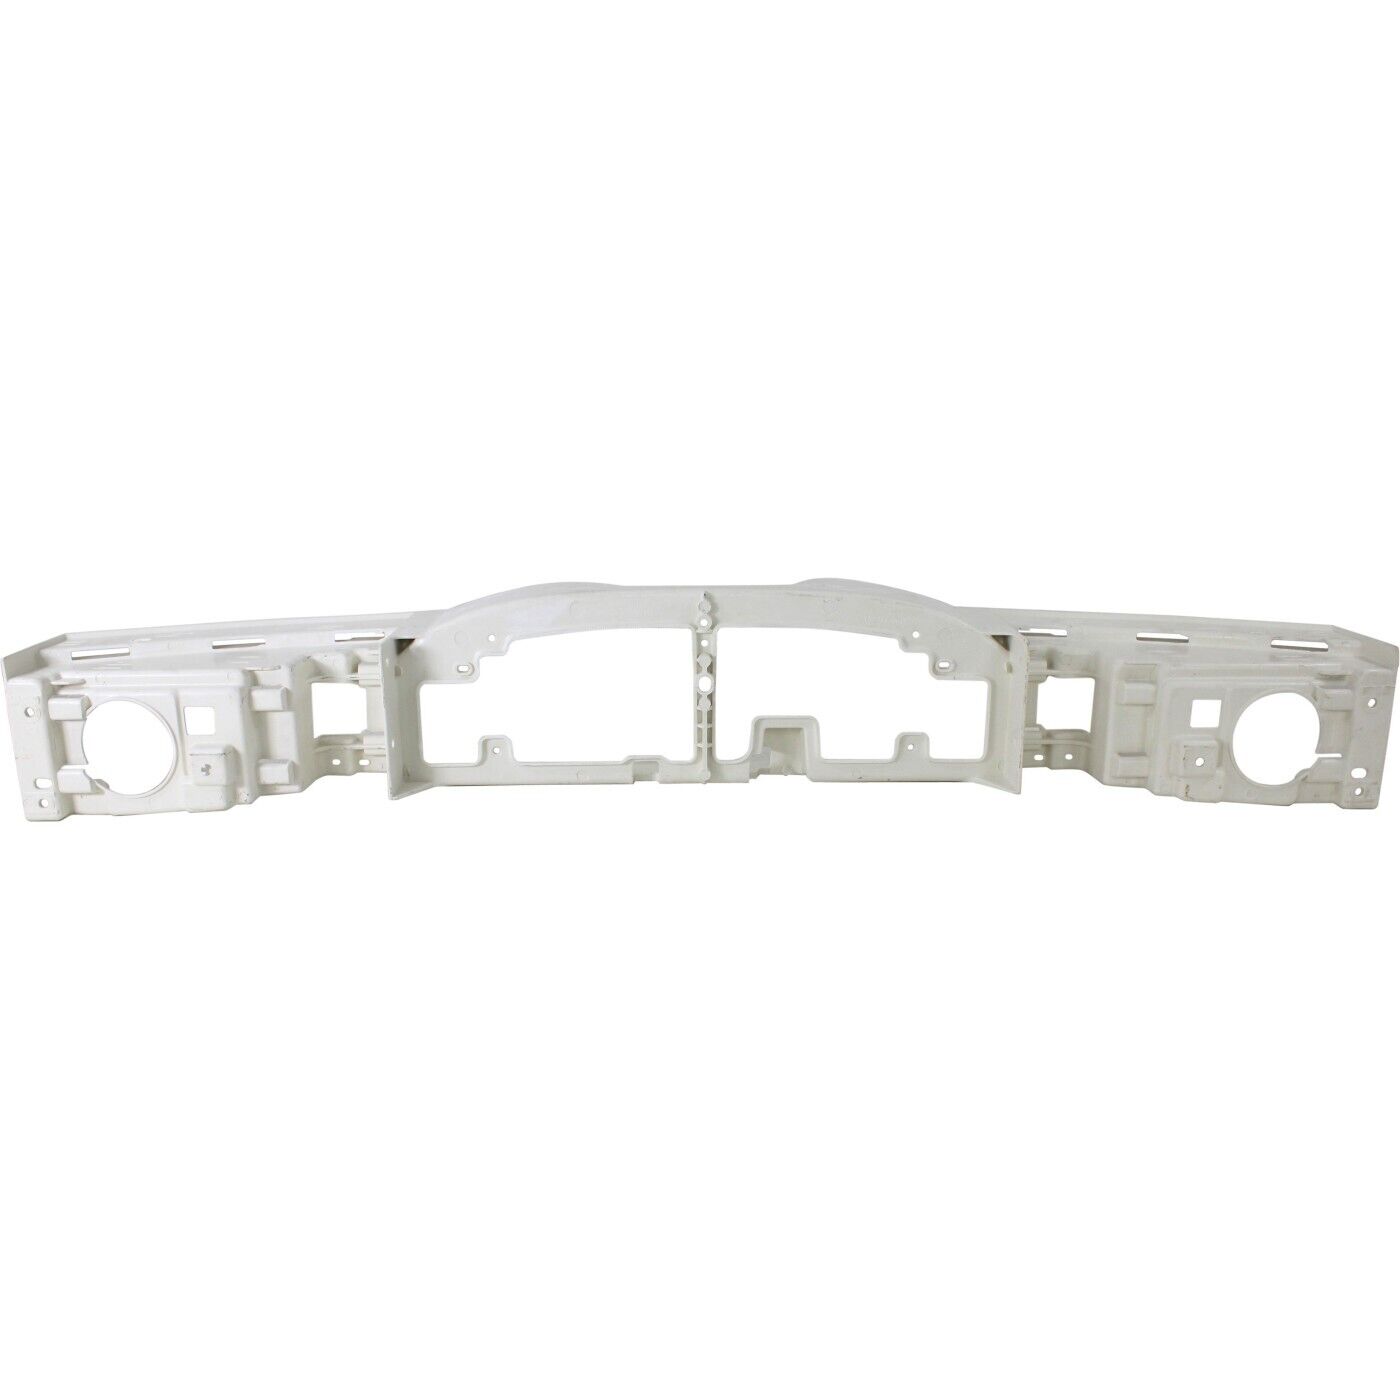 Header Panel For 98-02 Lincoln Town Car Grille Opening Reinforcement